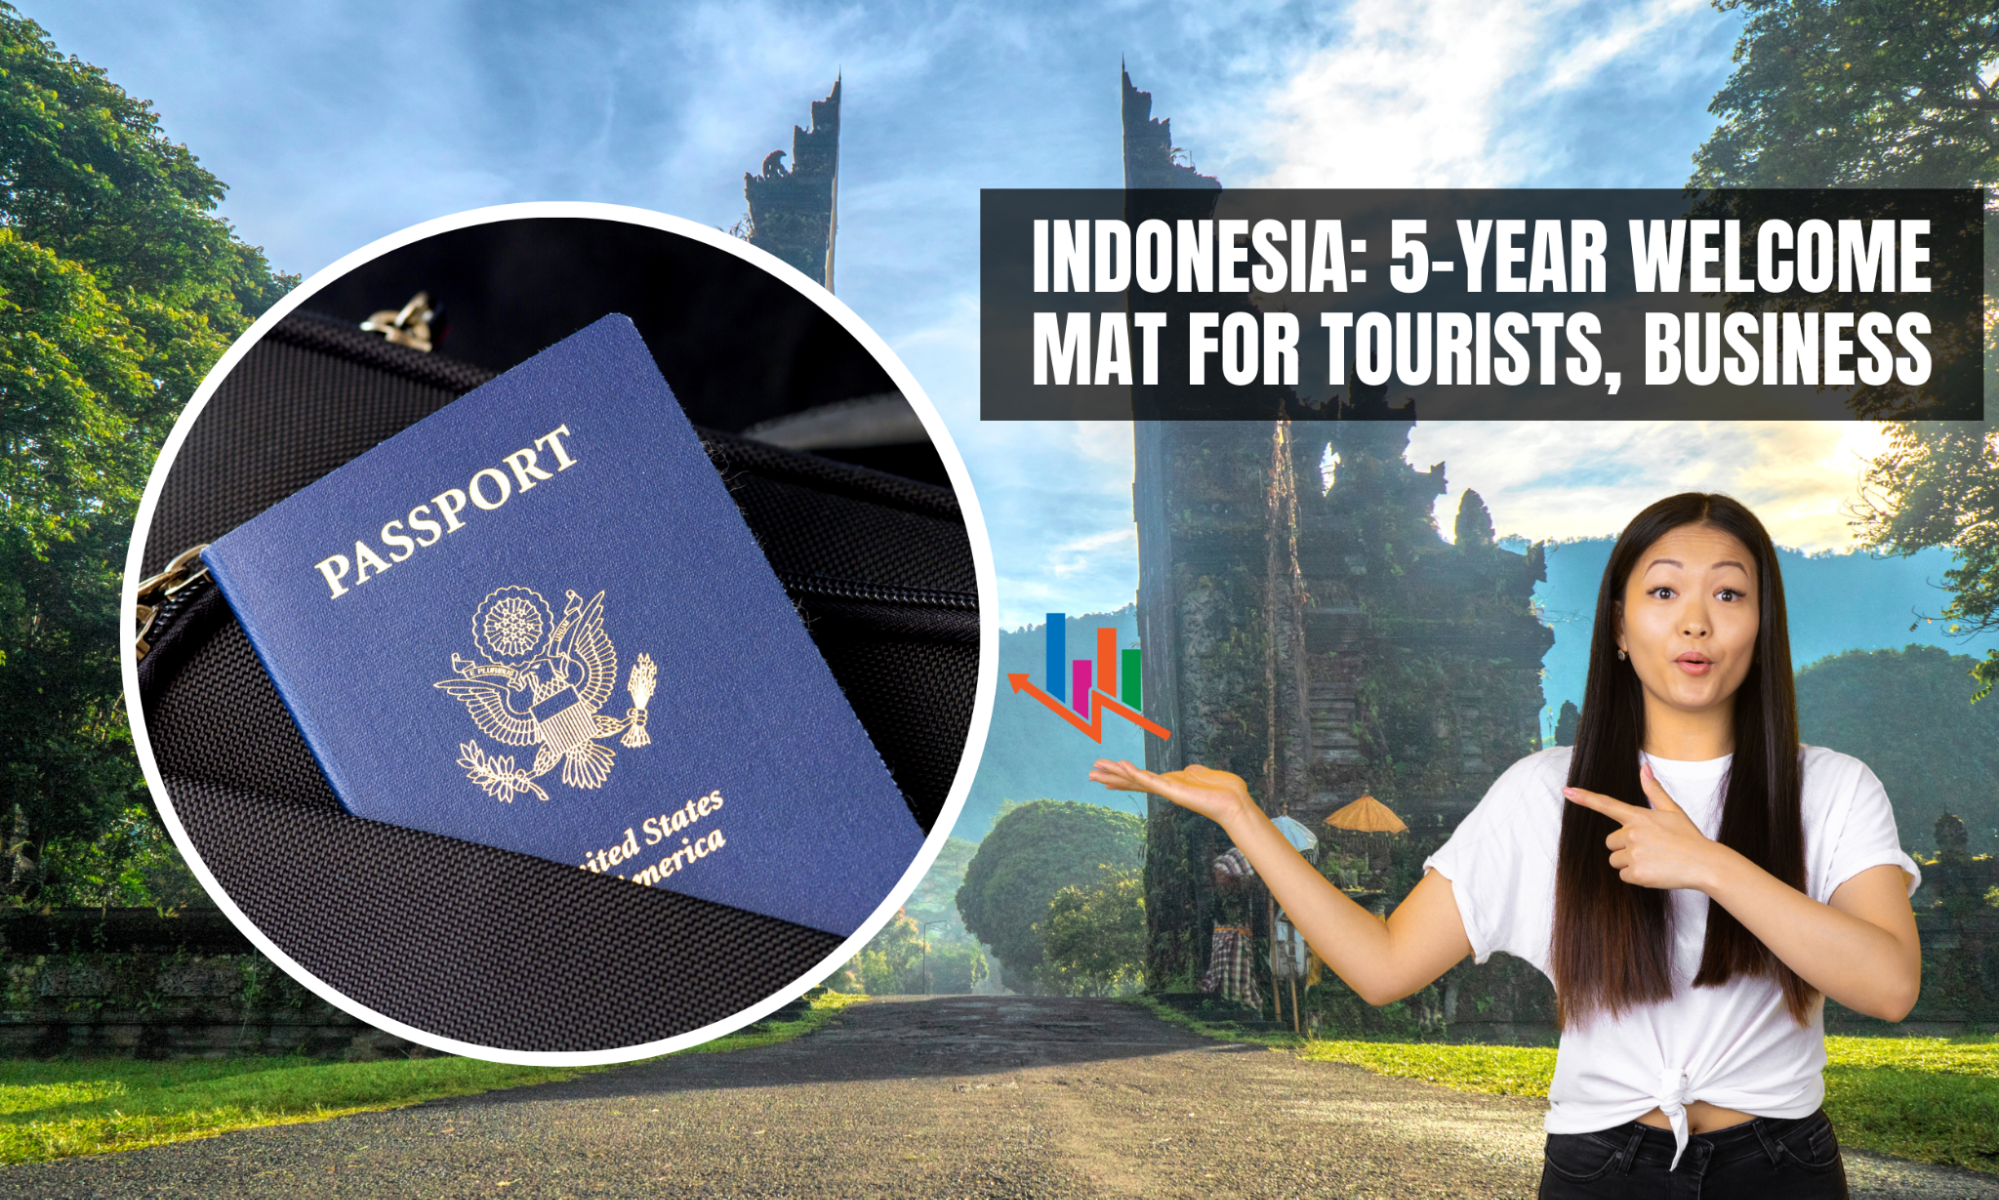 Indonesia: 5-year welcome mat for tourists, business